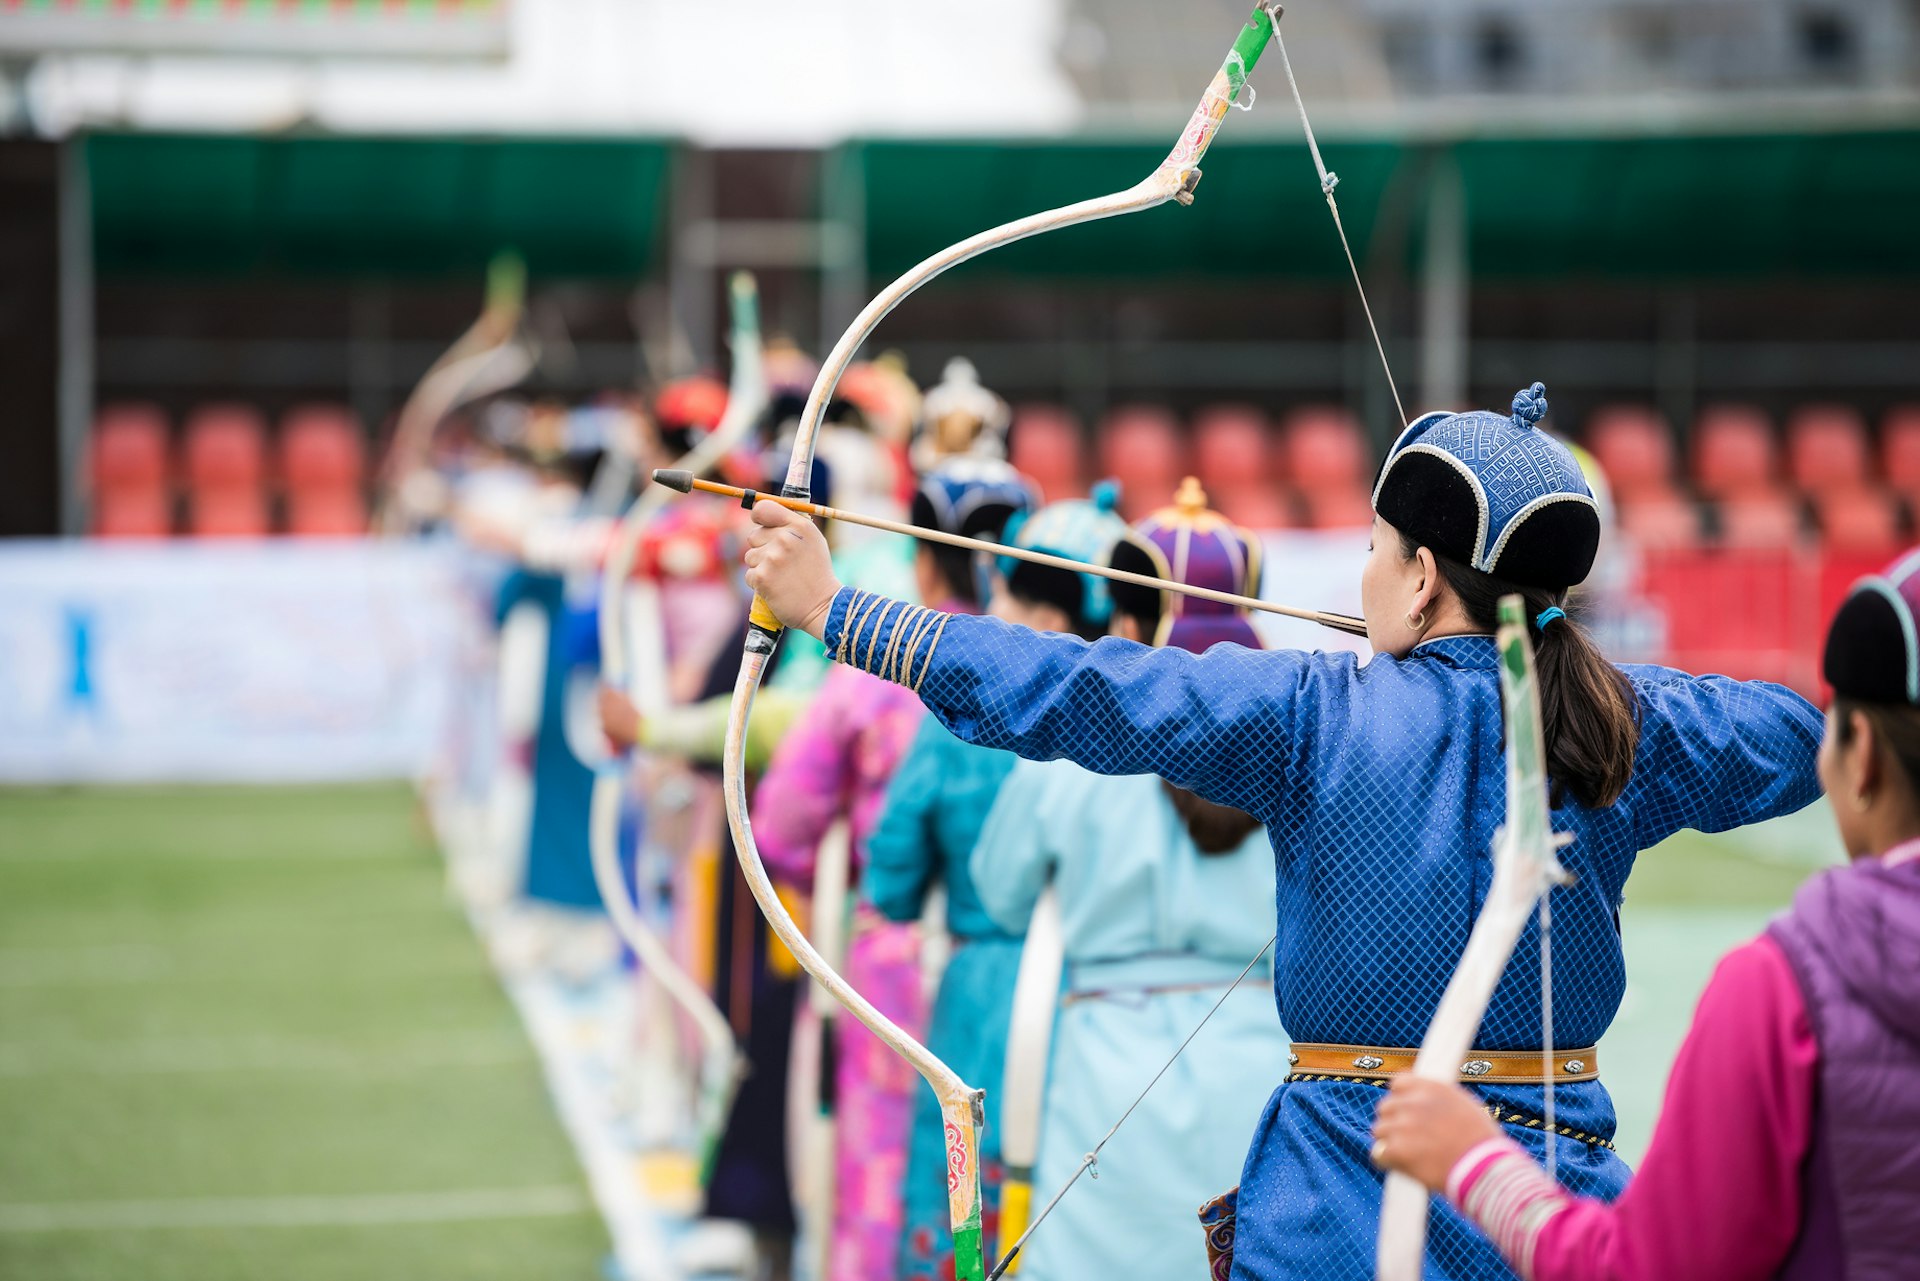 A woman in traditional Mongolian dress takes aim with a bow and arrow during an archery contest